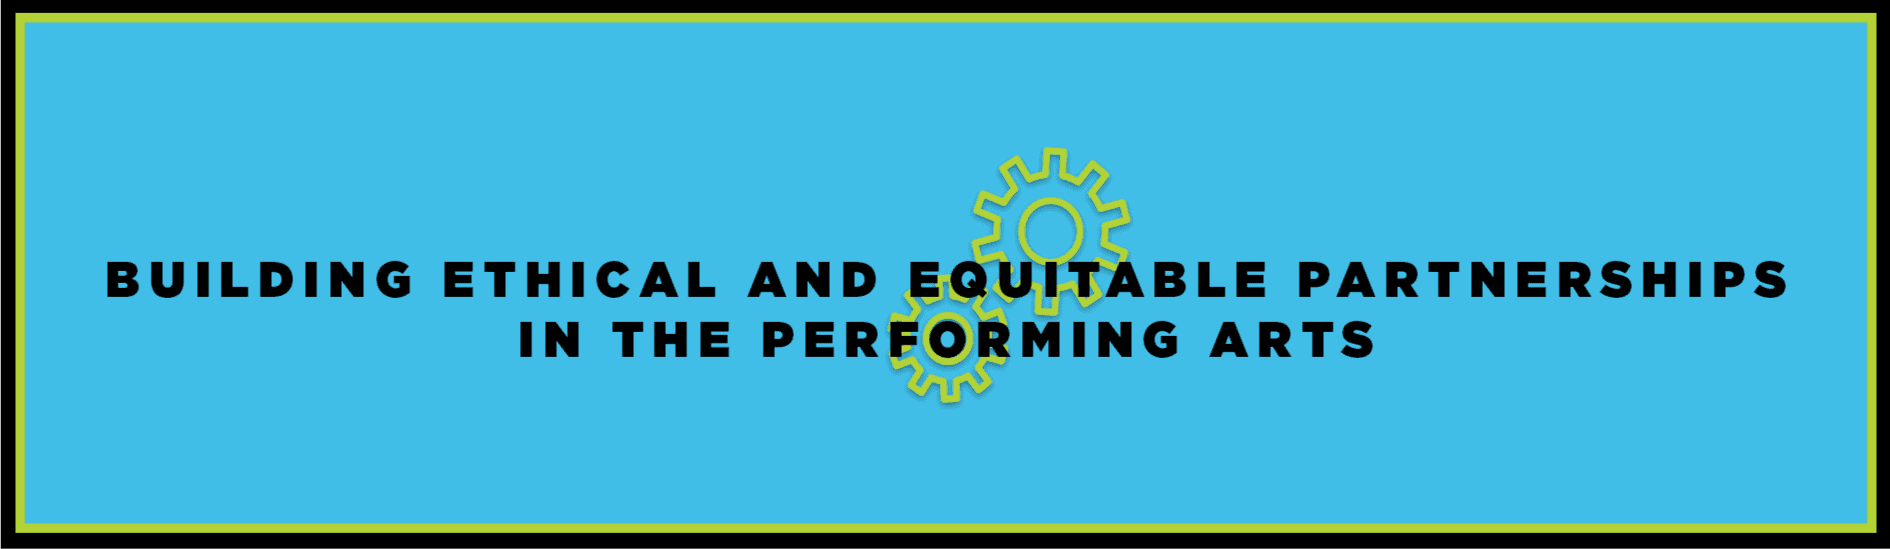 Building Ethical and Equitable Partnership in the Performing Arts